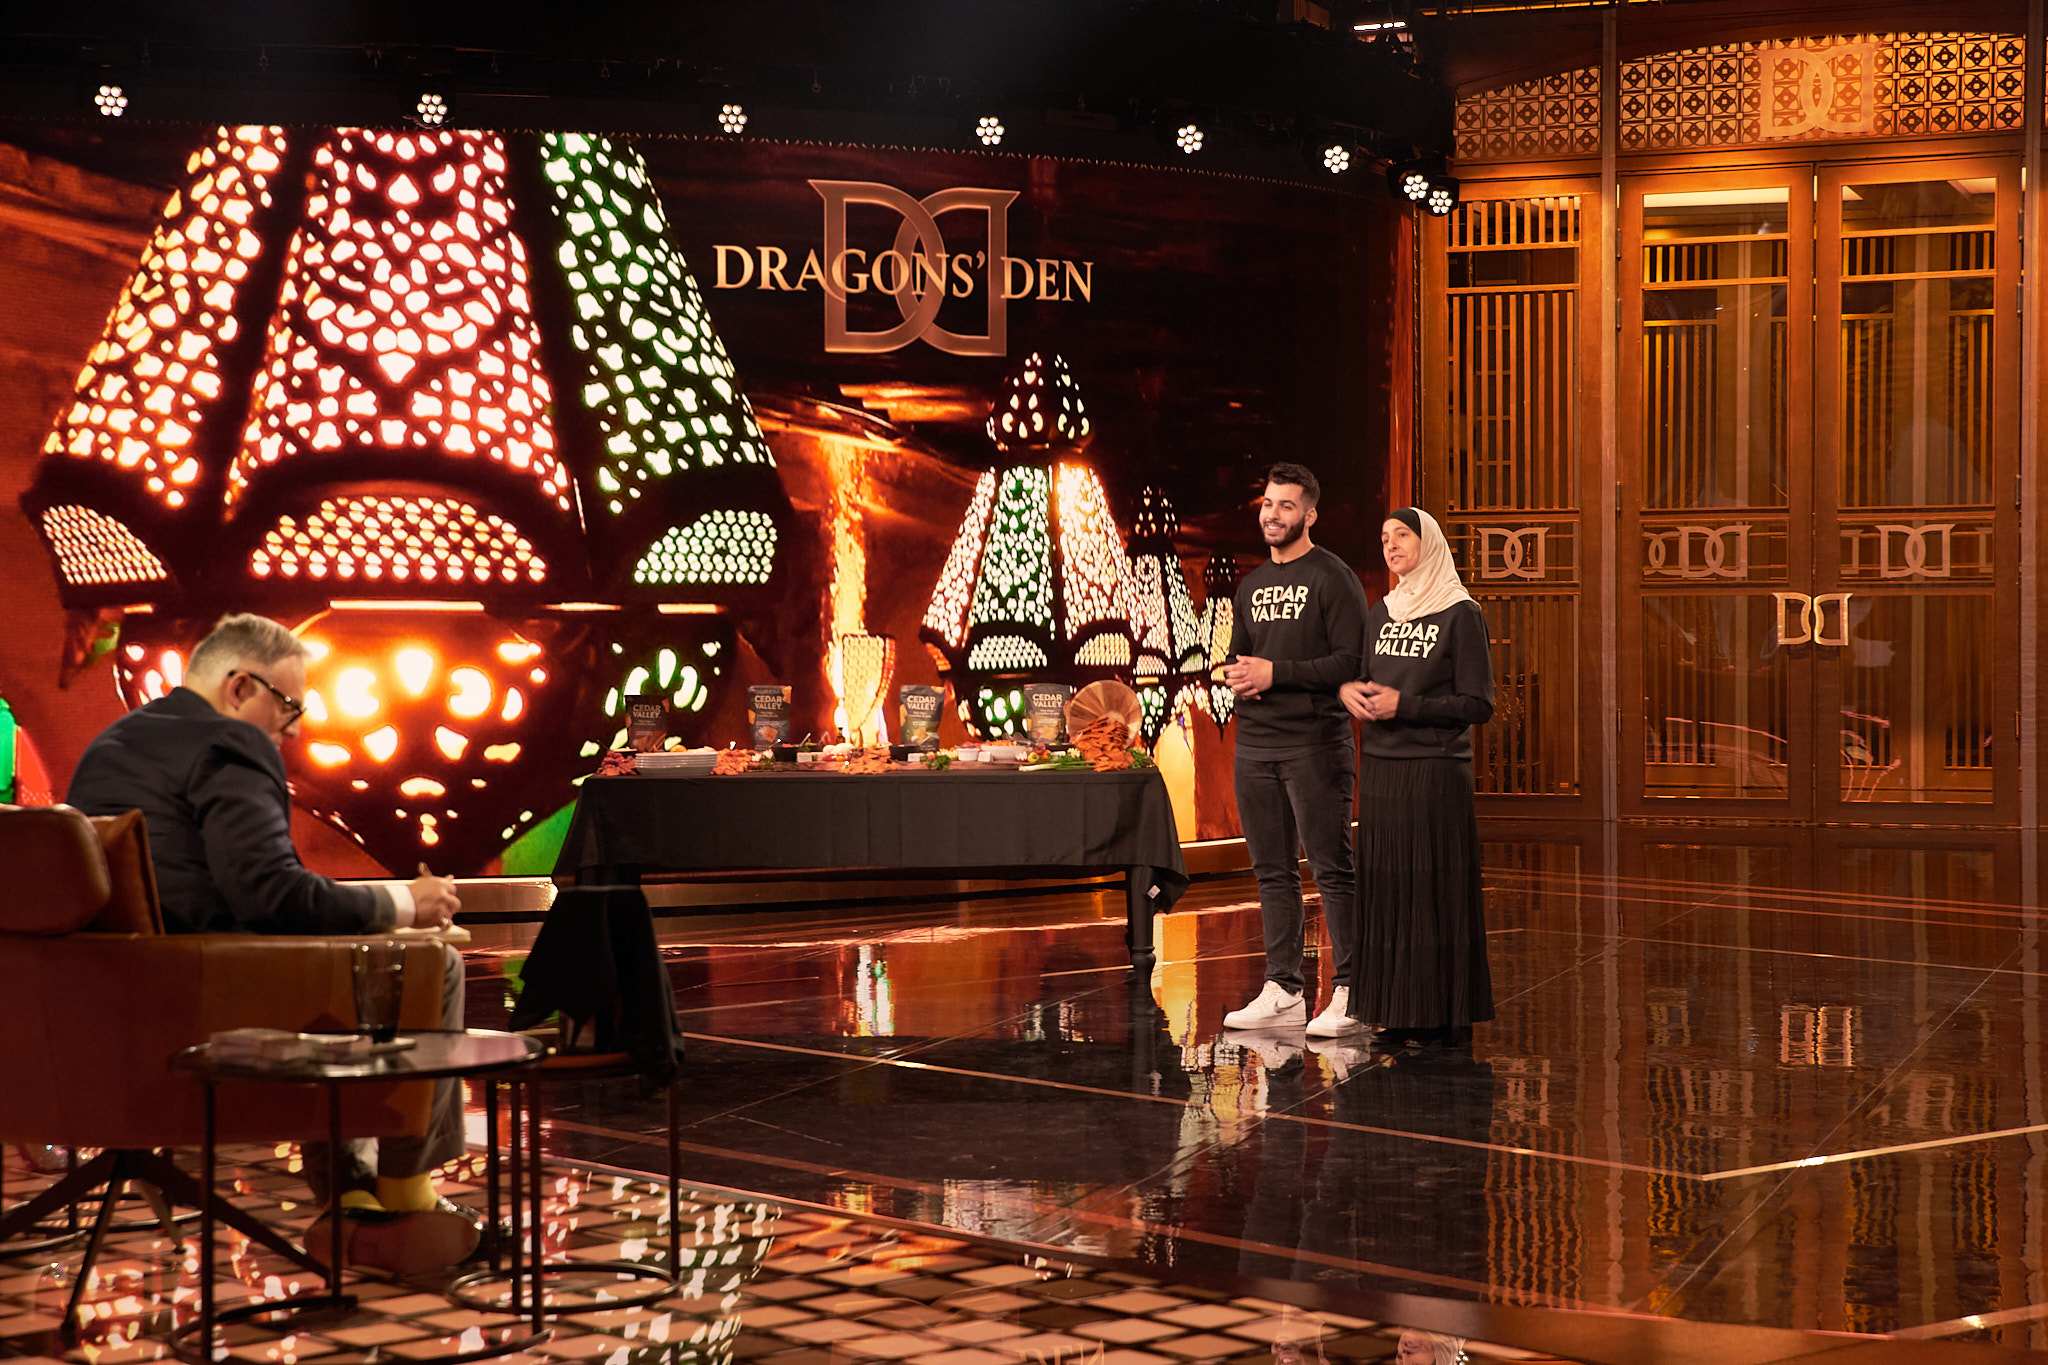 Ameen Fadel and Surria Fadel, owners of Cedar Valley, pitch their business on CBC's Dragon's Den.